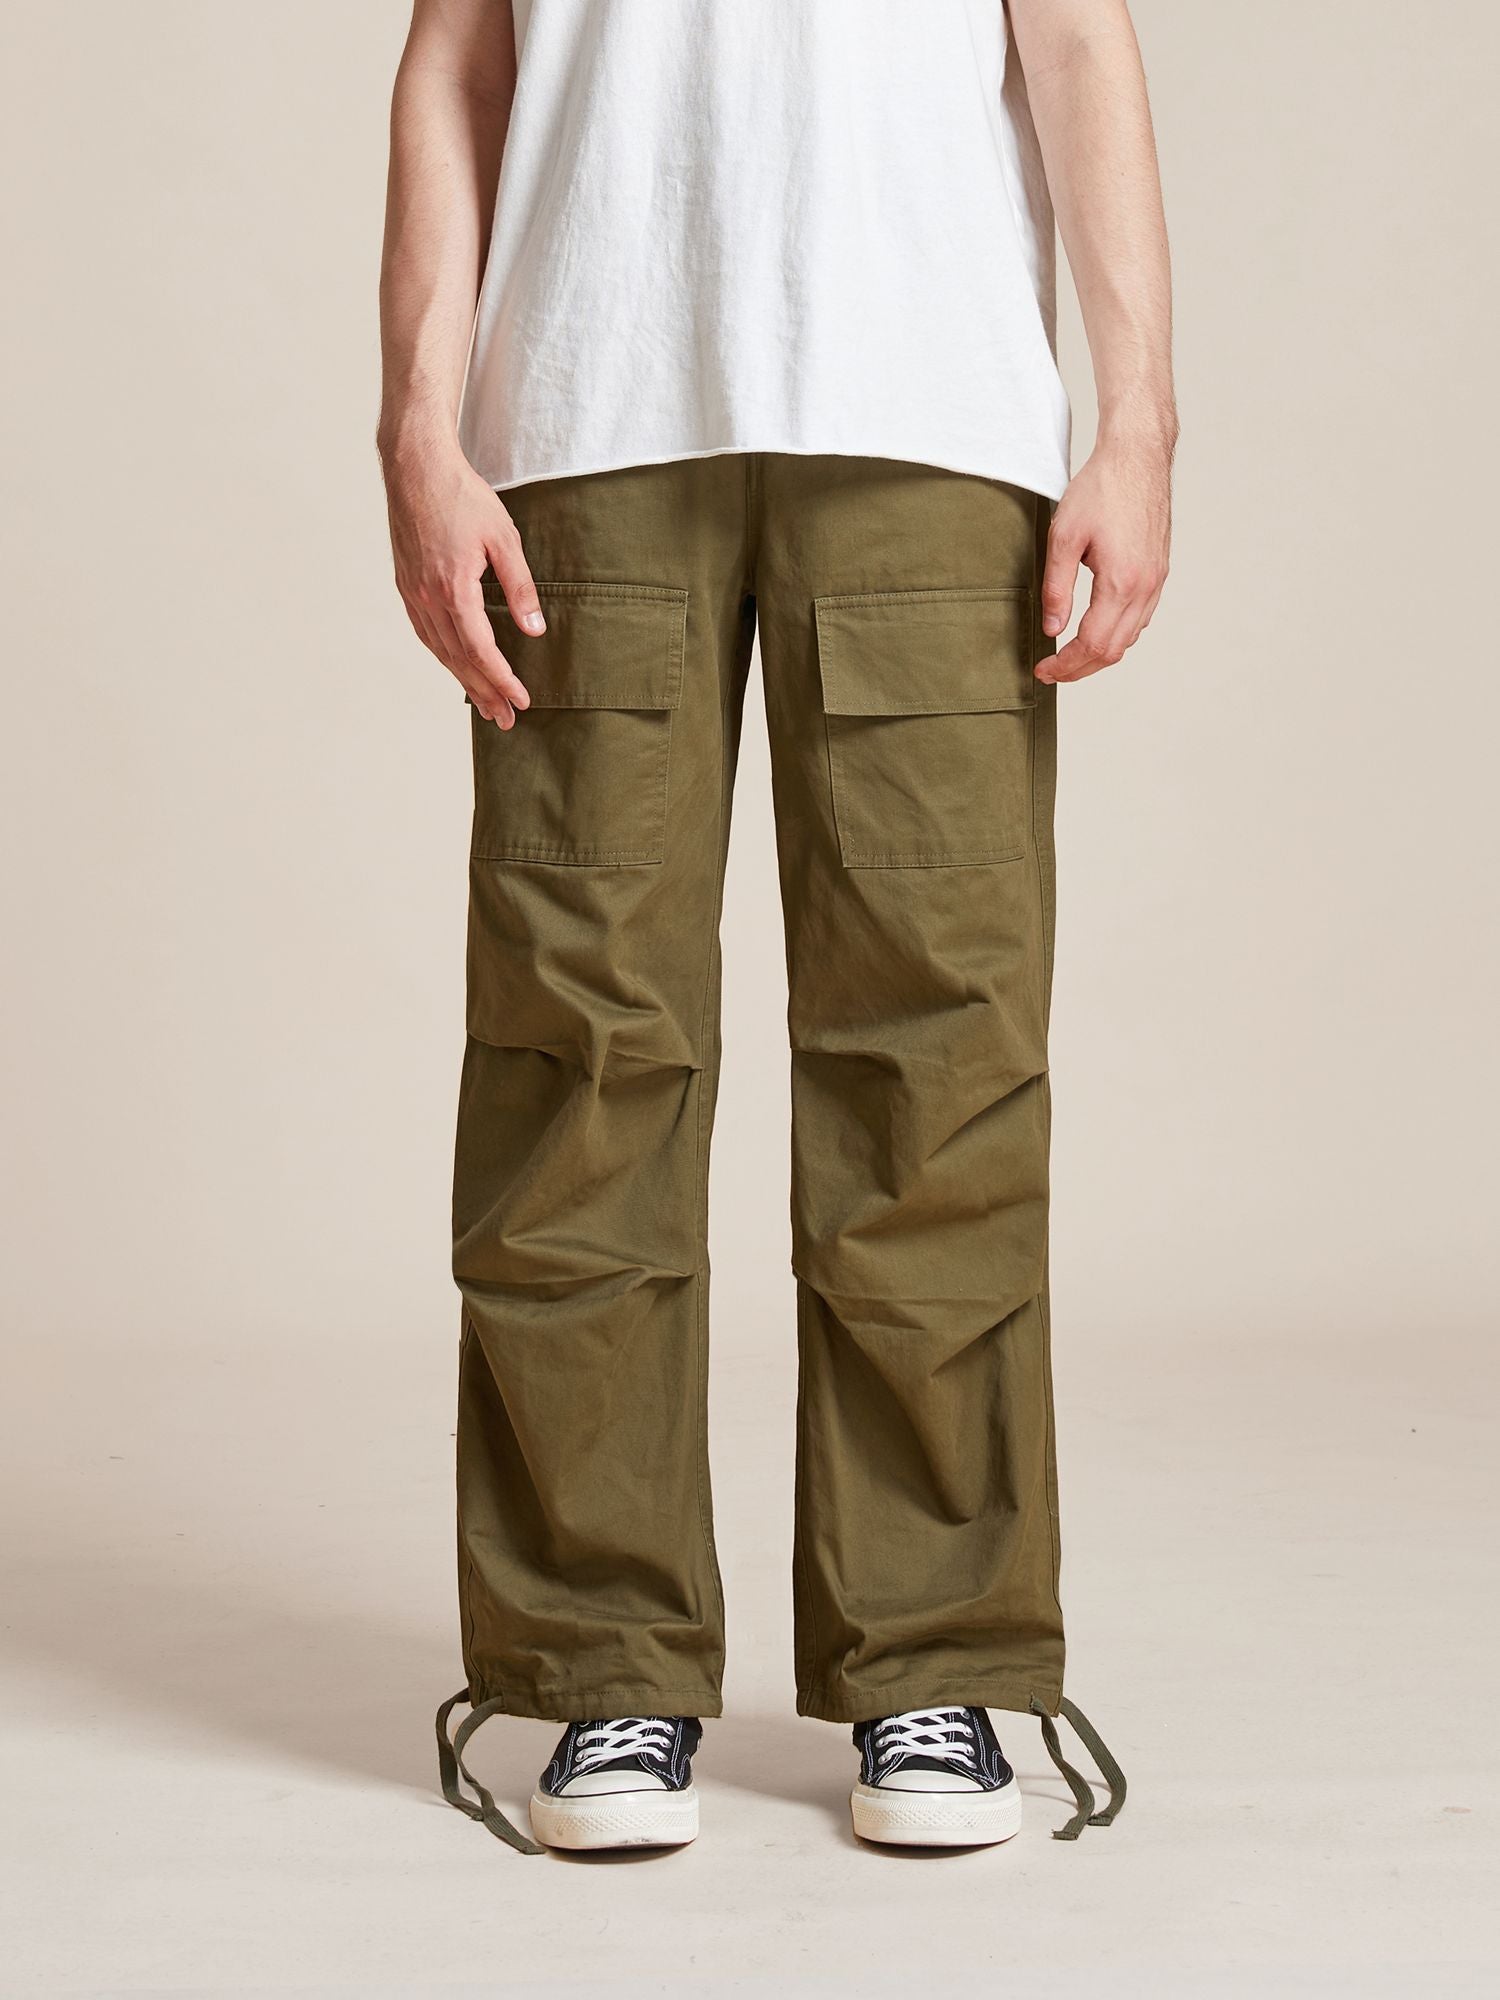 A person wearing olive green Parachute Cargo Twill Pants by Found and black and white sneakers stands with arms at their sides, displayed from the shoulders down against a plain background.